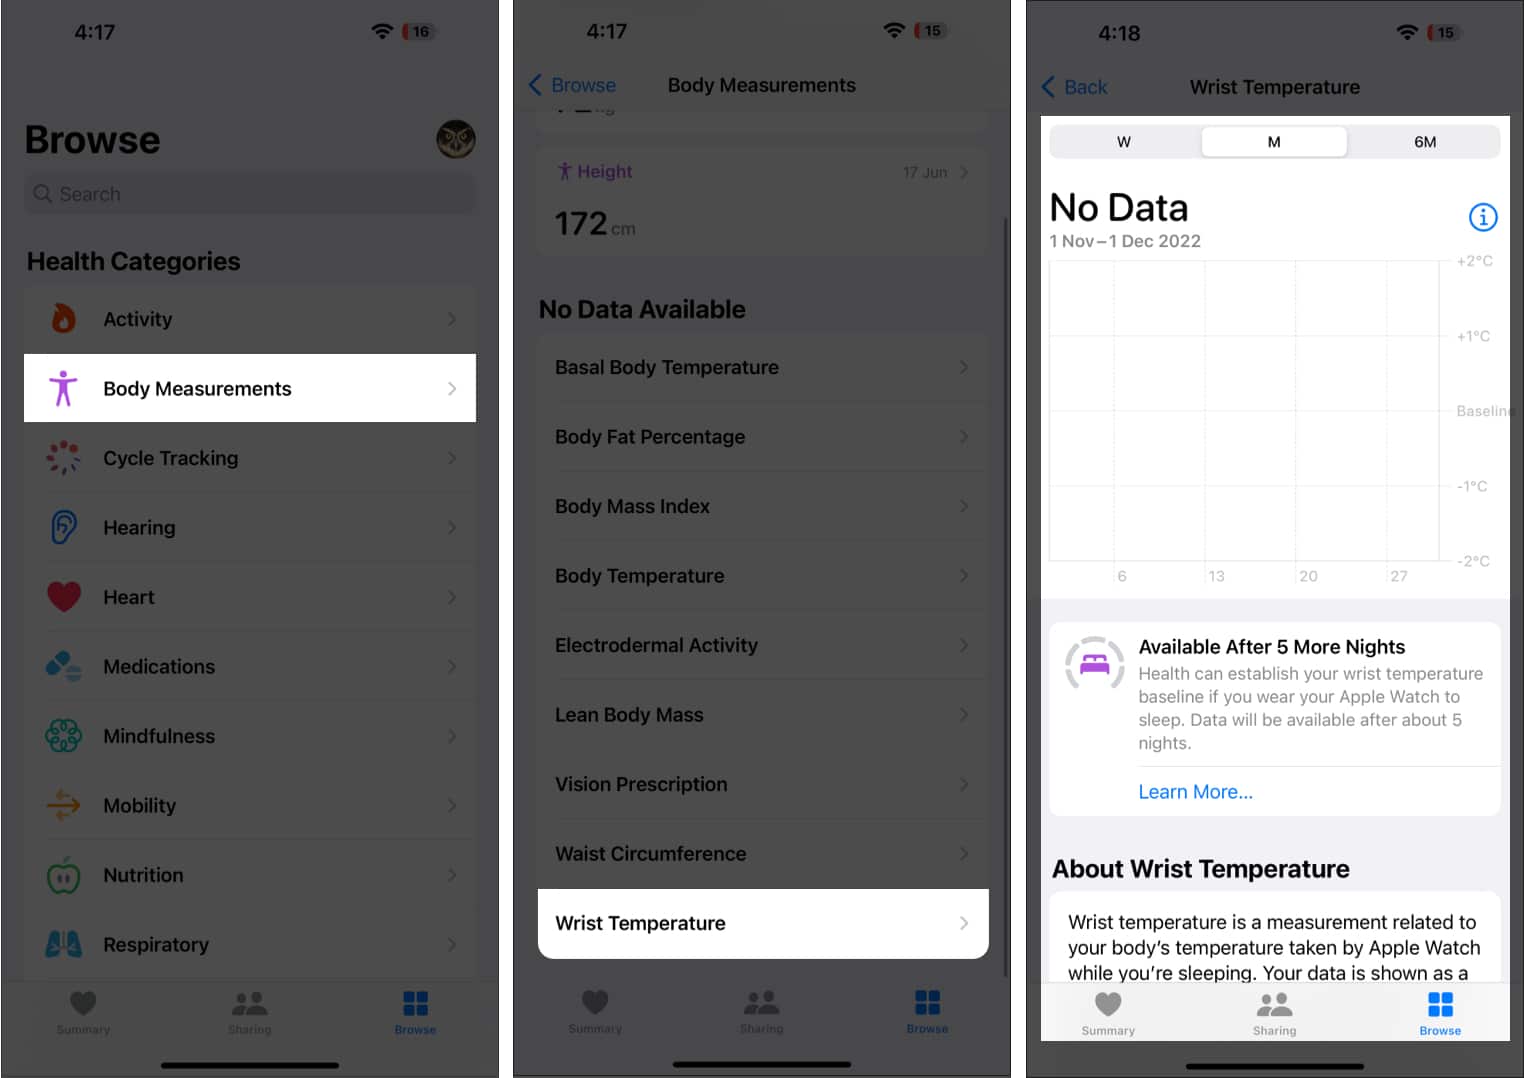 How to check wrist temperature data using iPhone 